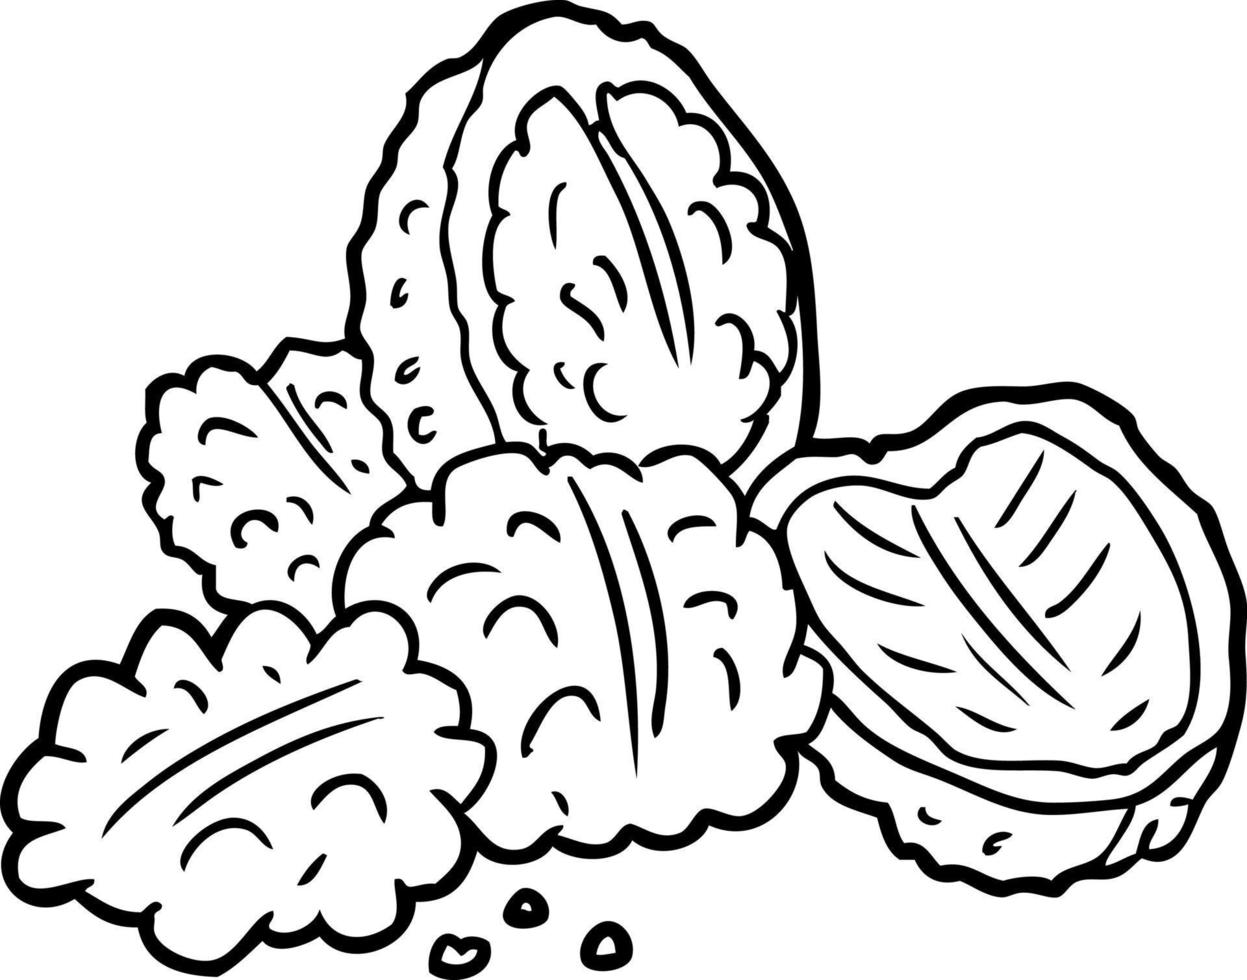 line drawing of a walnuts vector